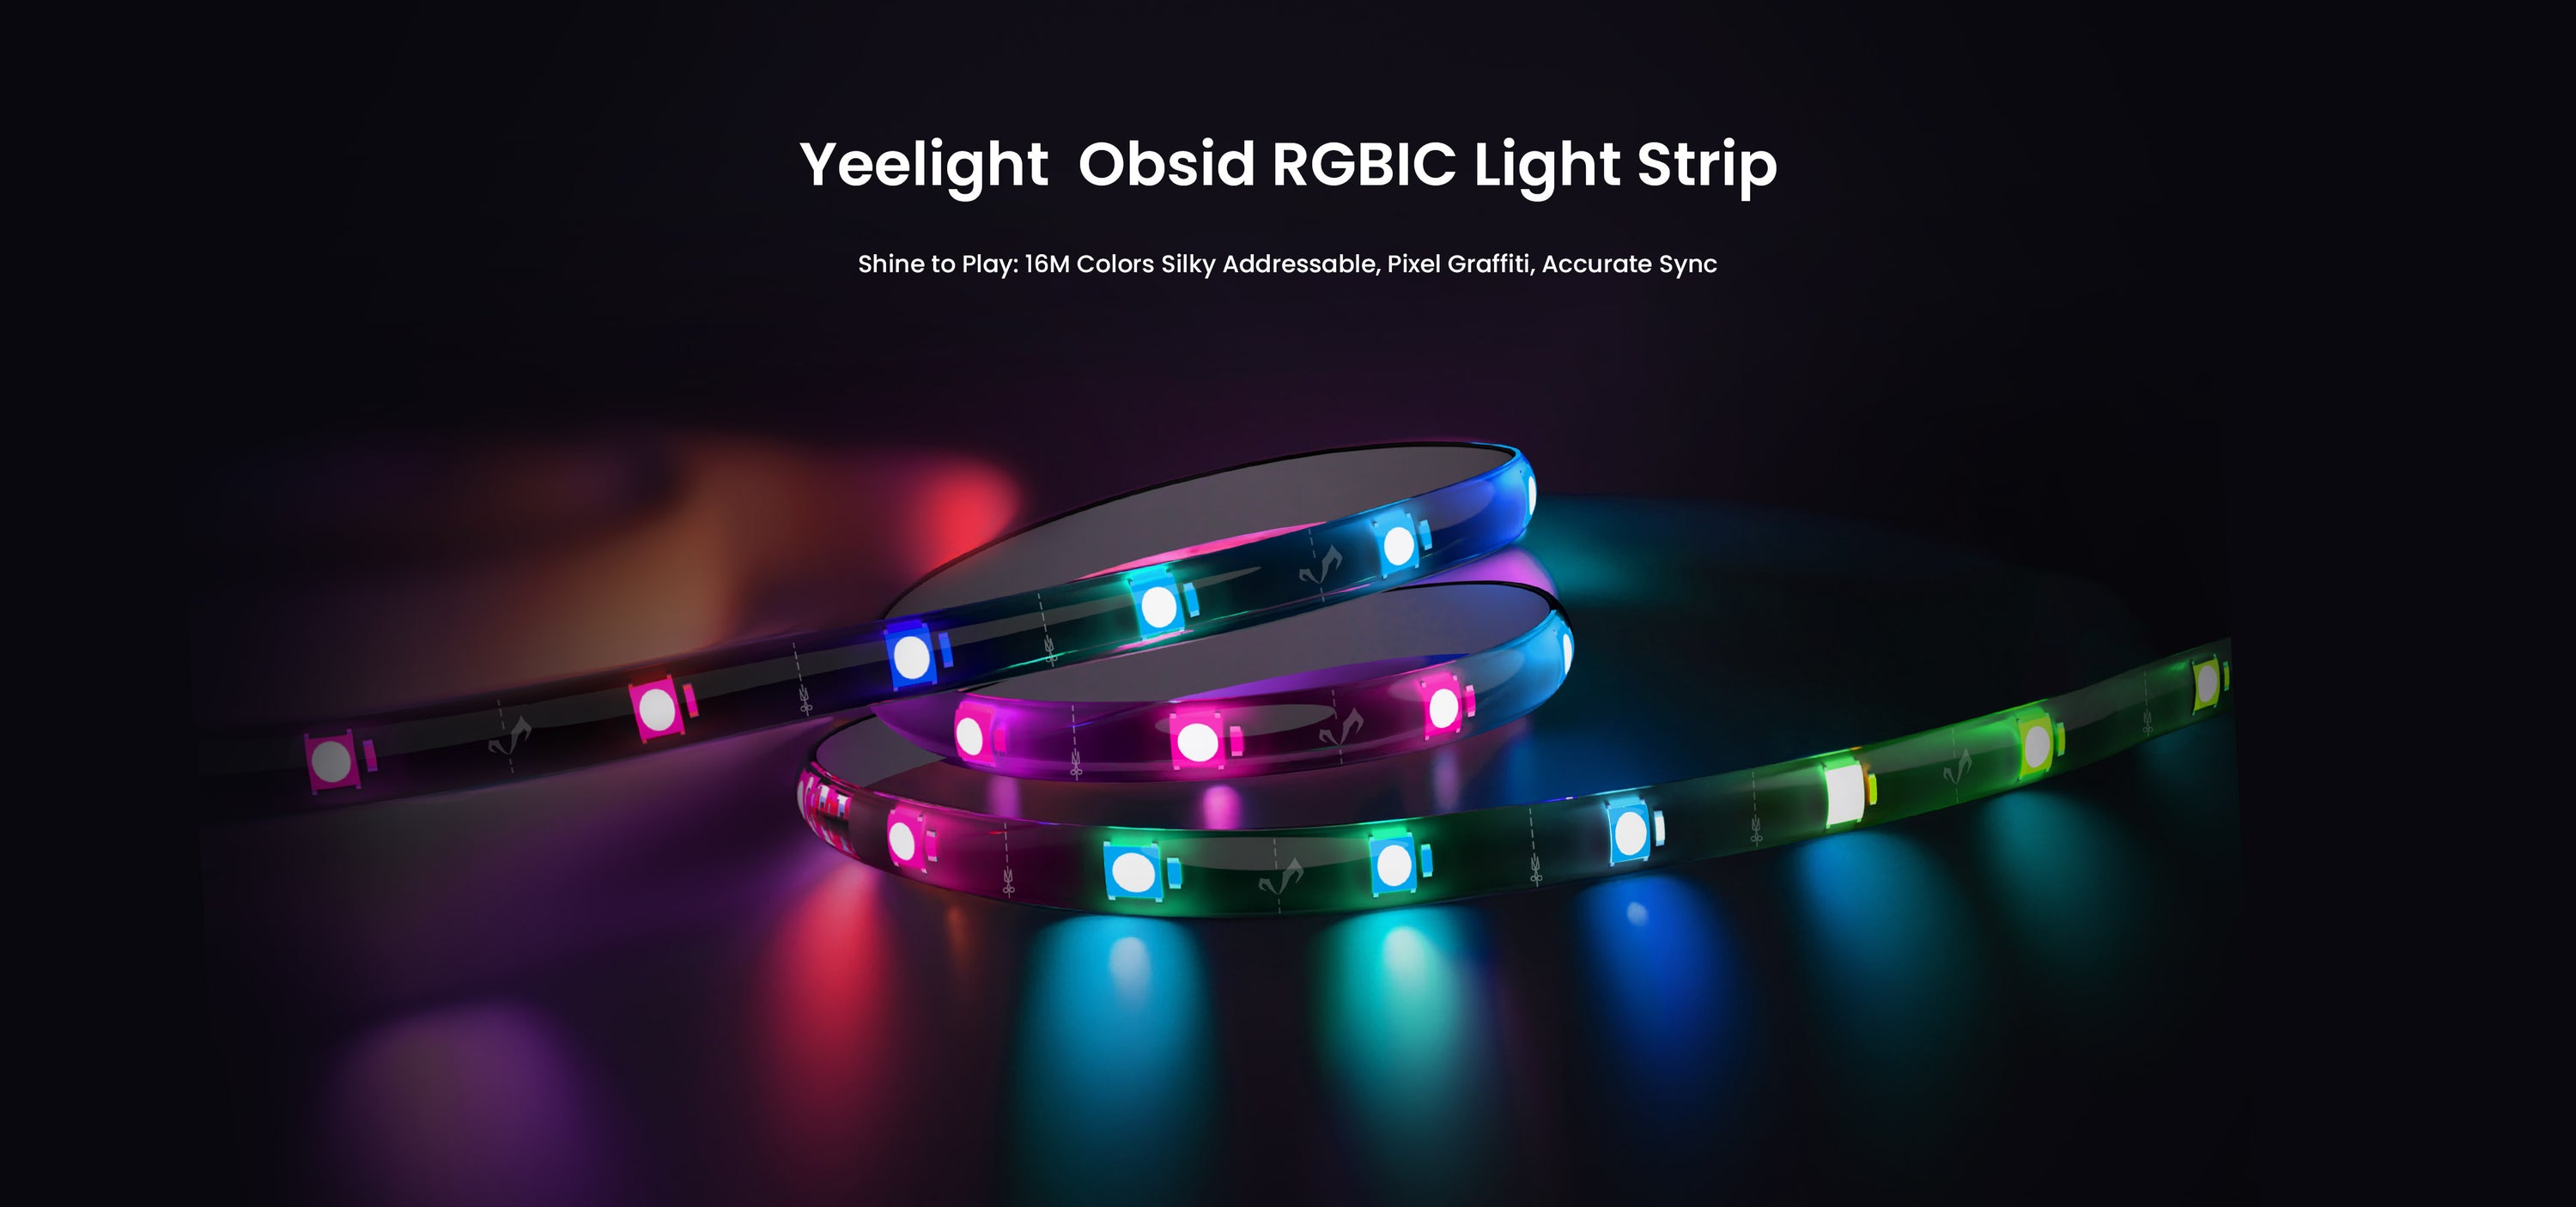 Yeelight announced the Obsid RGBIC LED Light Strip, which can synchronise with music and games